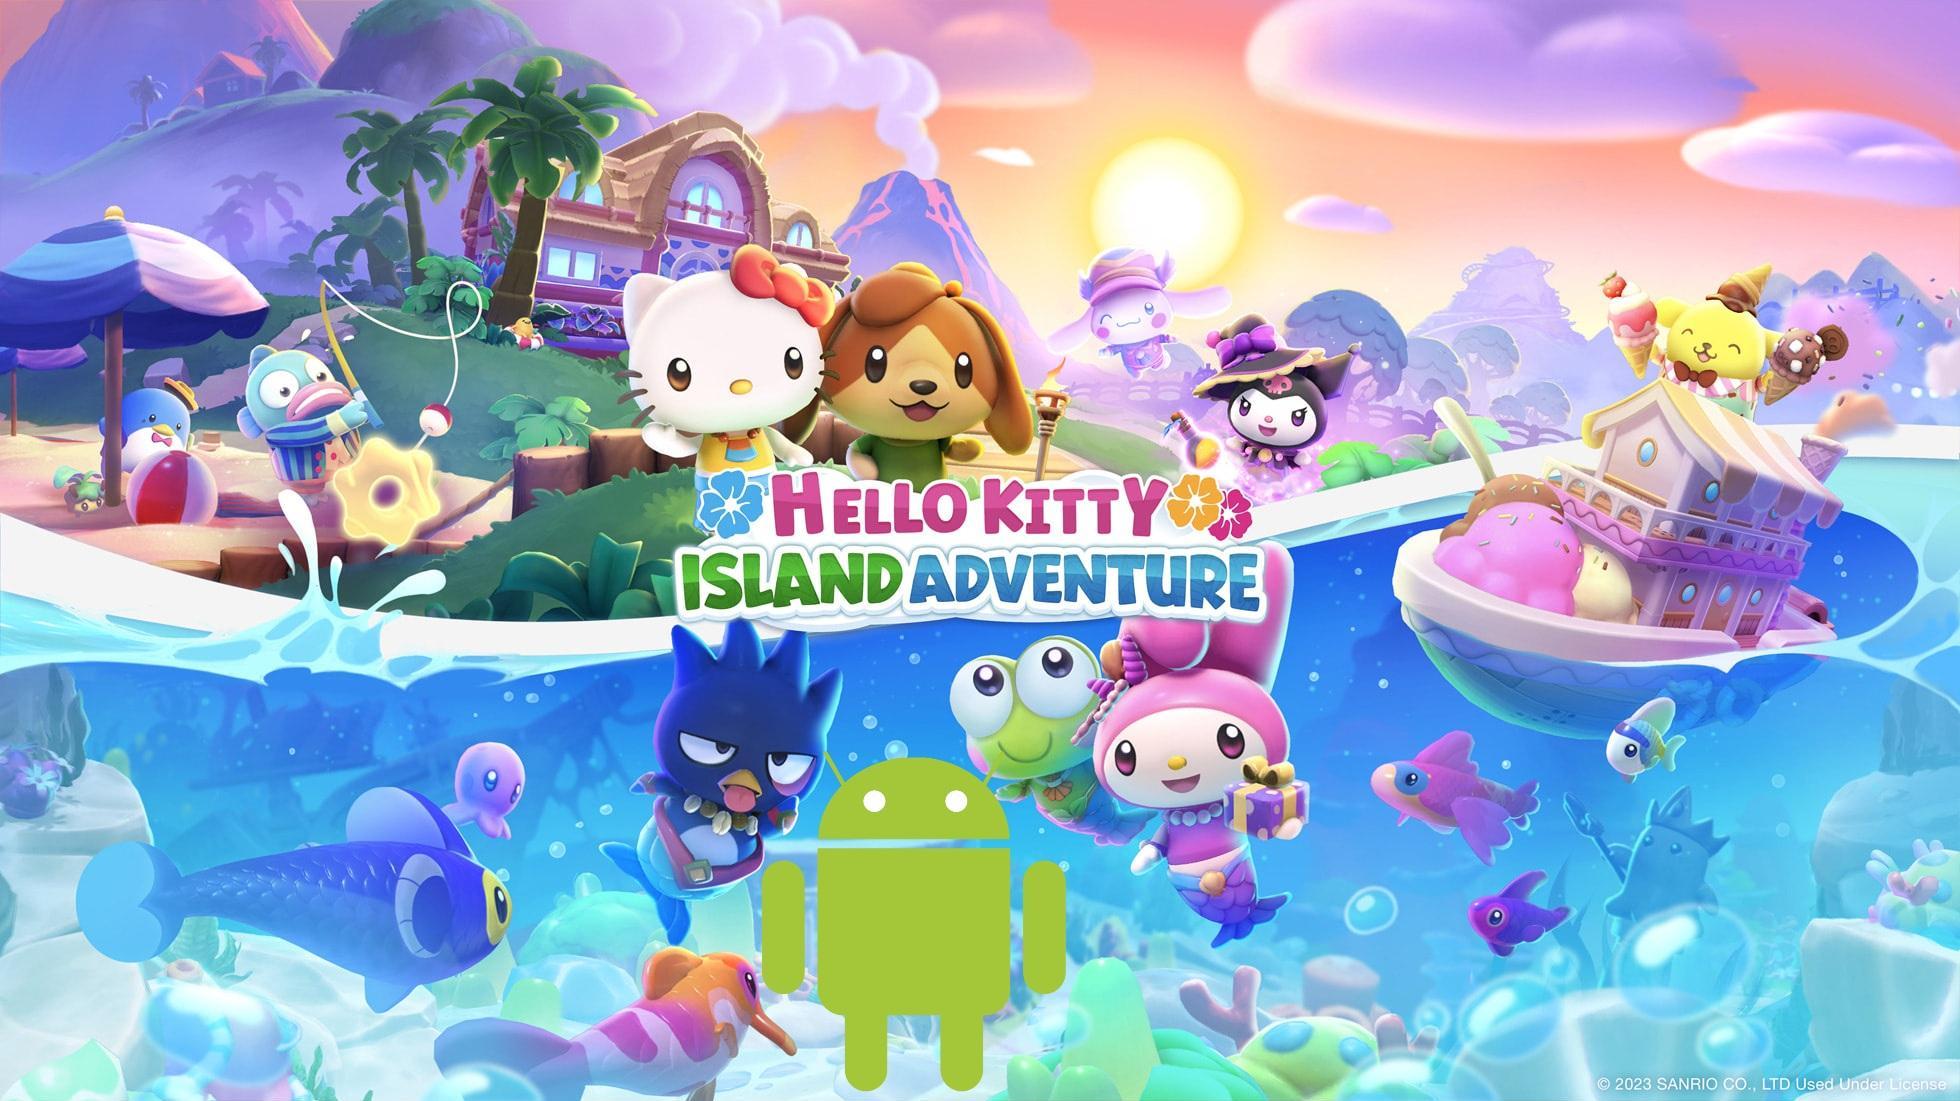 Any Games Like Hello Kitty Island Adventure On Android Please